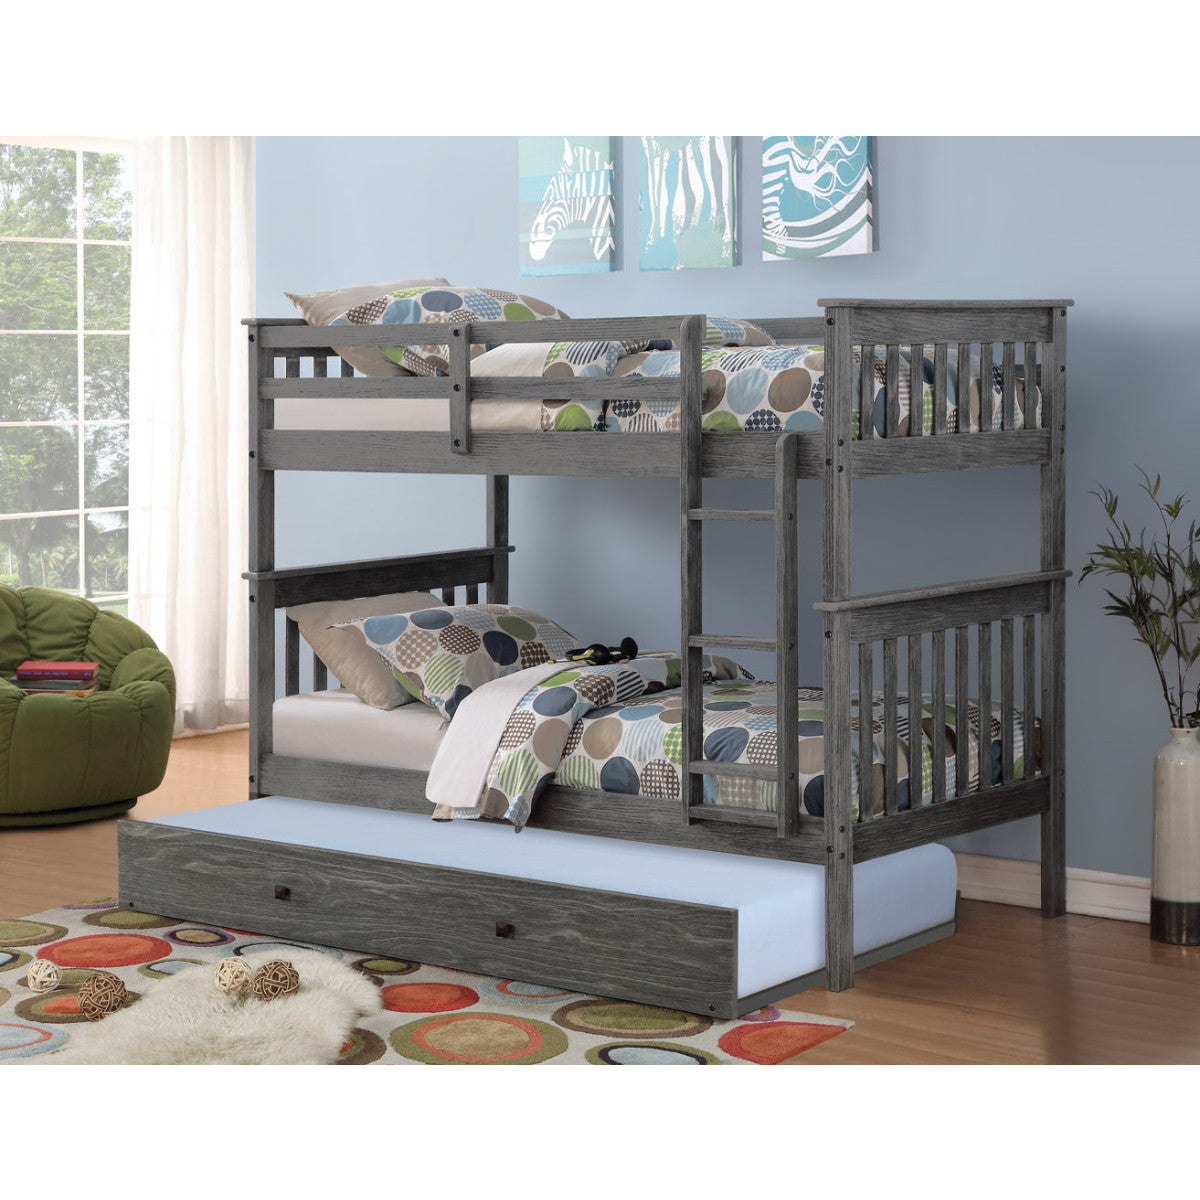 TWIN/TWIN MISSION BUNK BED WITH TRUNDLE BED BRUSHED GREY FINISH